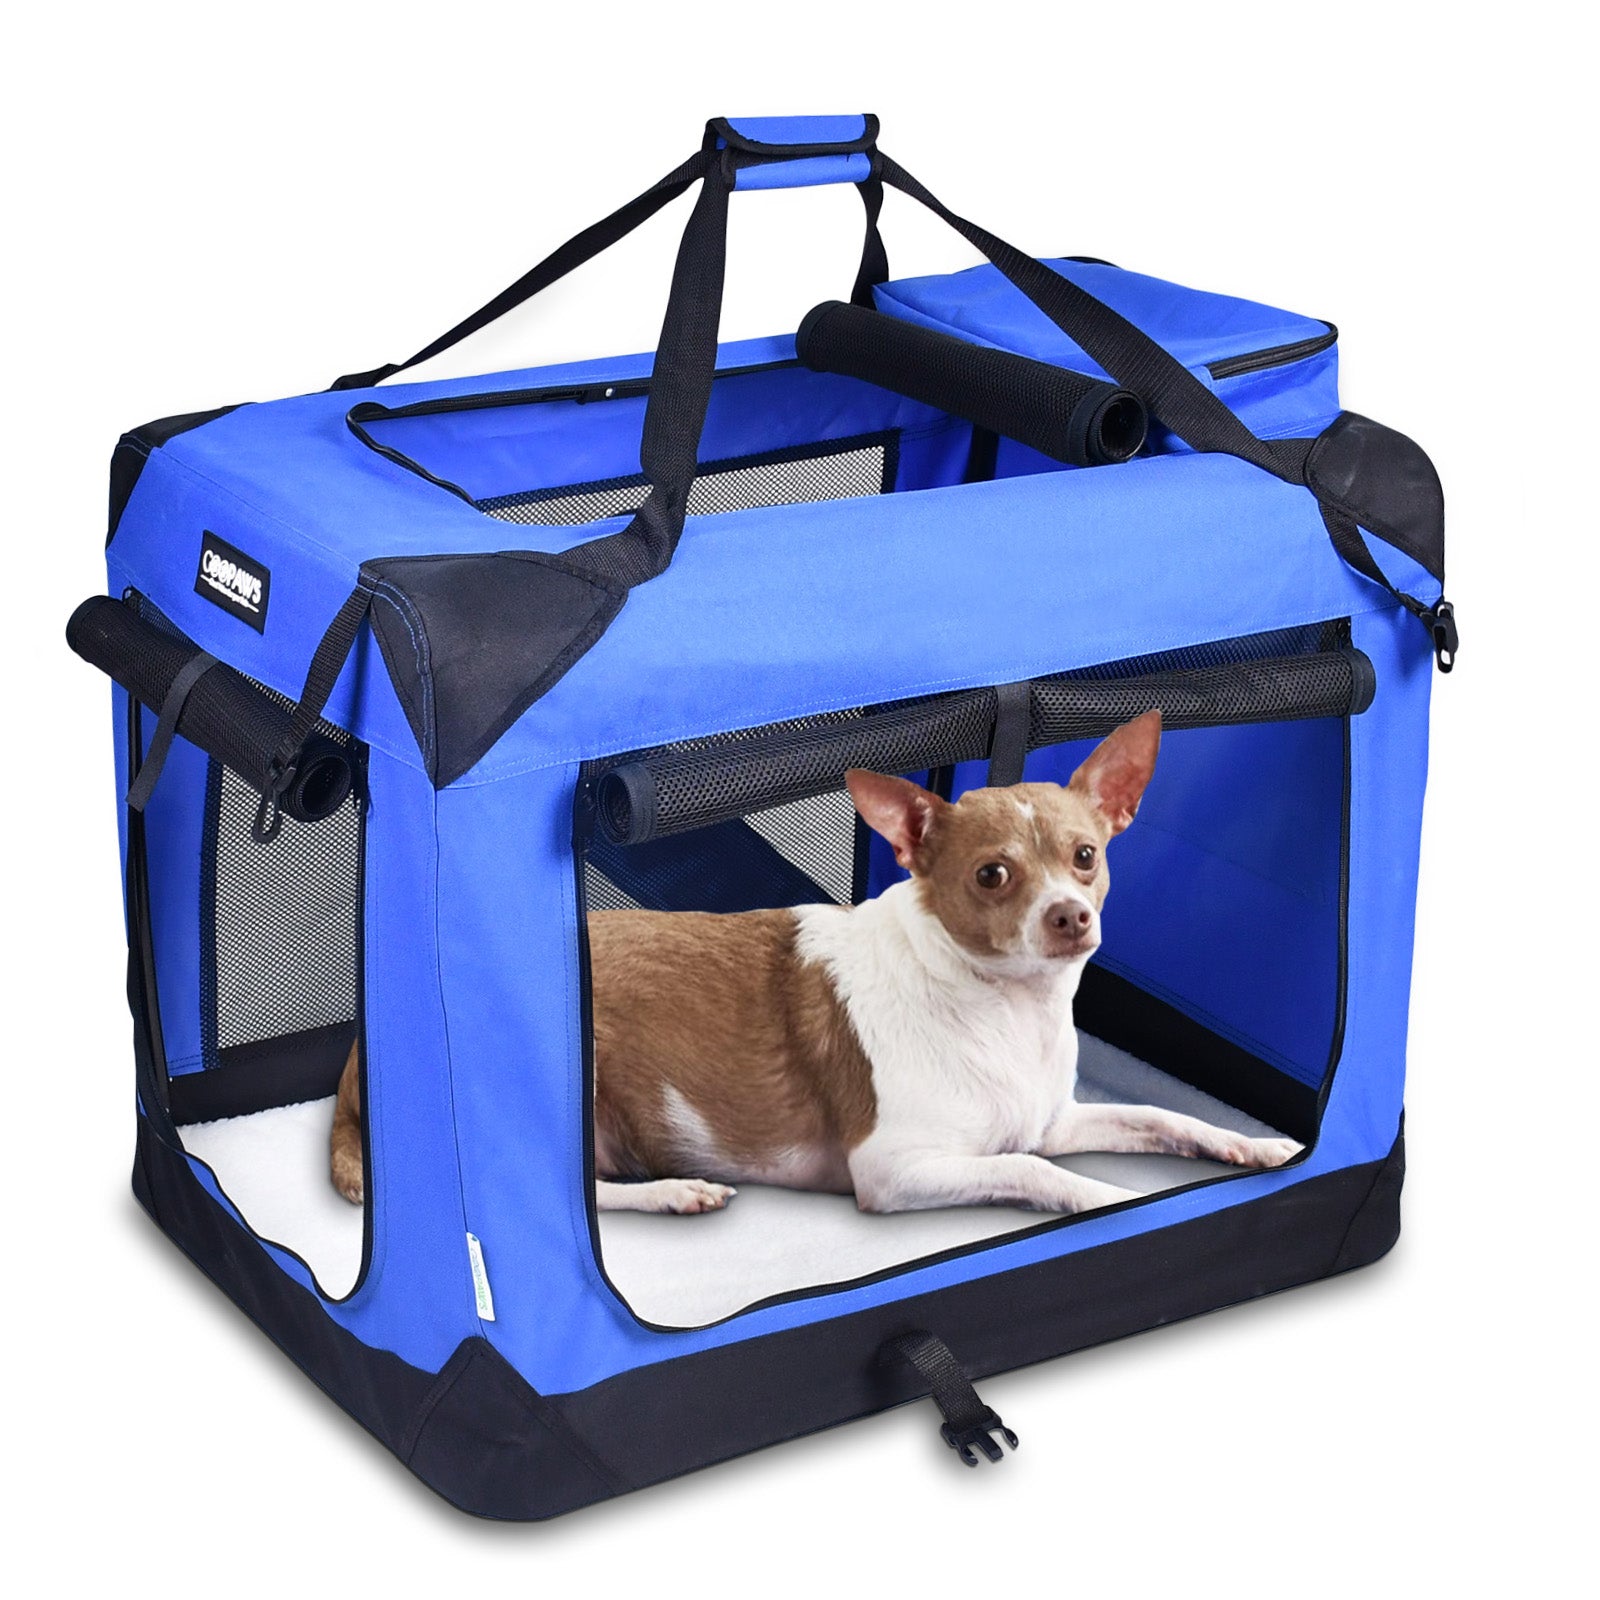 Jespet Indoor & Outdoor 3-Door Collapsible Soft-Sided Dog, Cat & Small Pet Crate, Blue, 30''